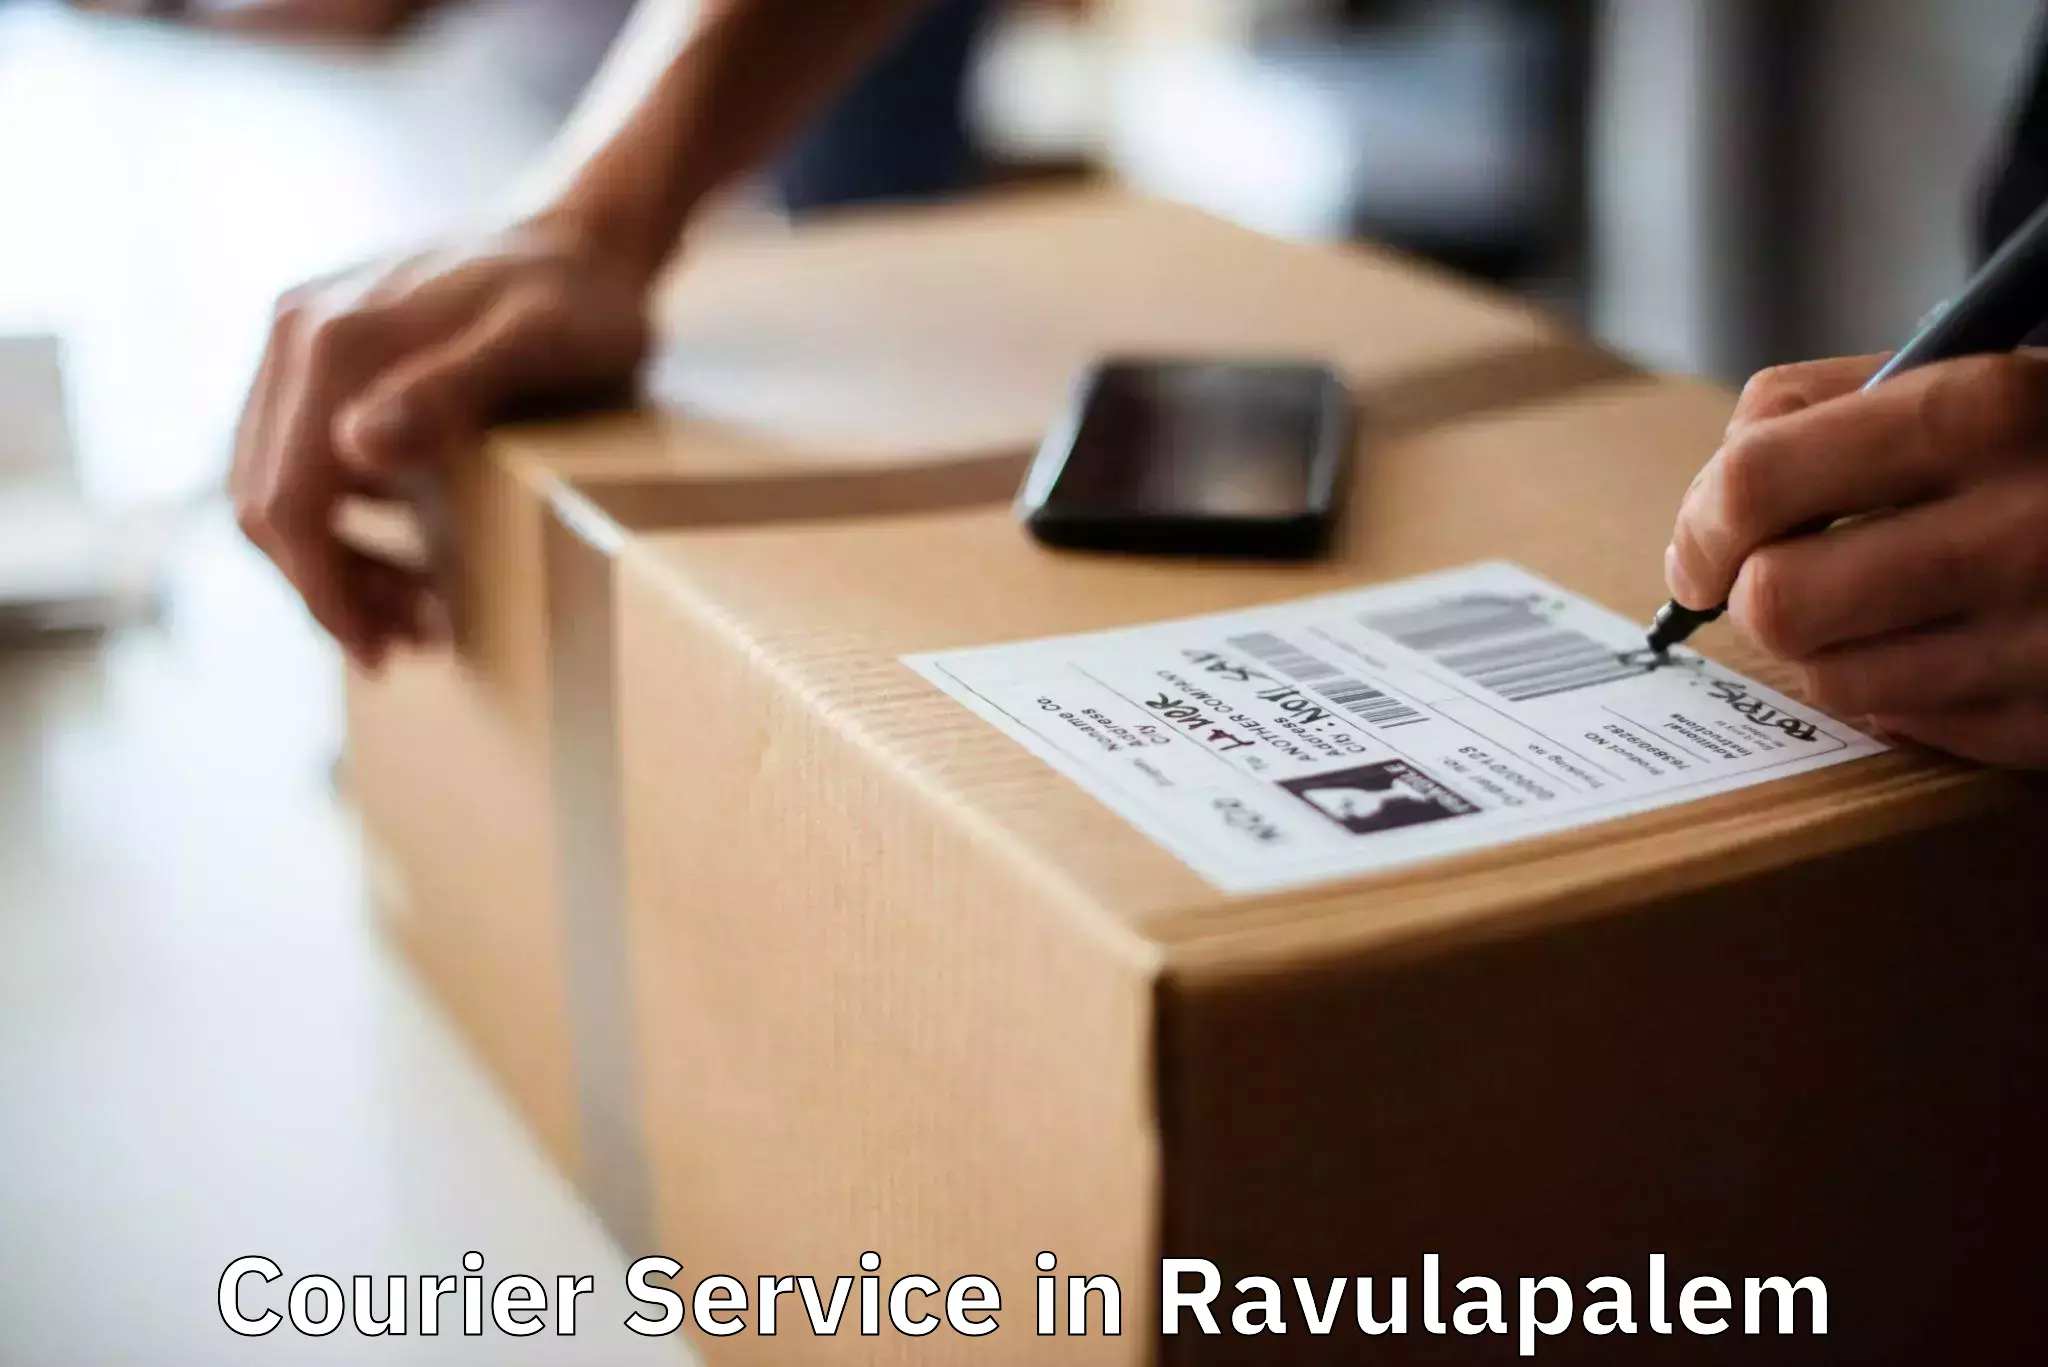 Business delivery service in Ravulapalem